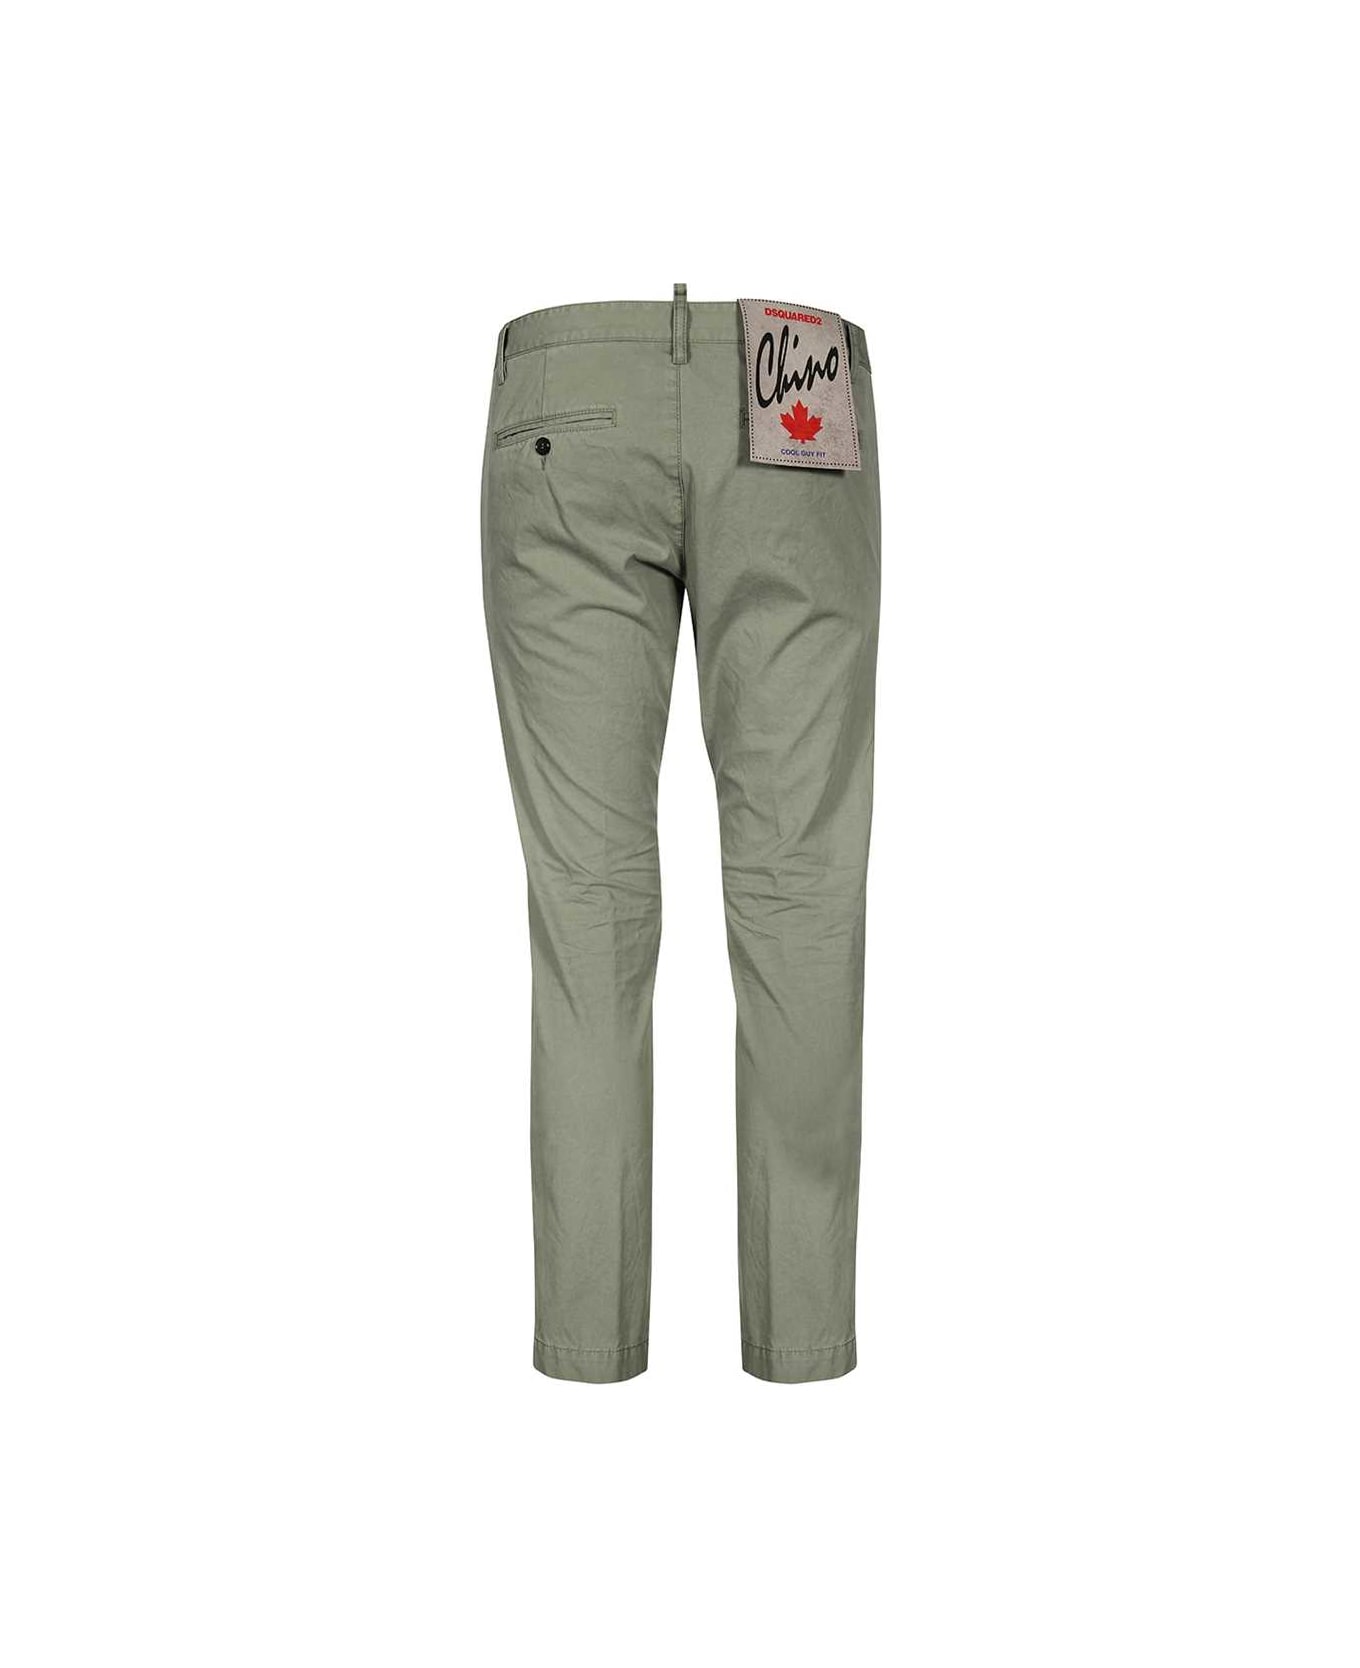 Dsquared2 Cotton Chino Trousers - green ボトムス